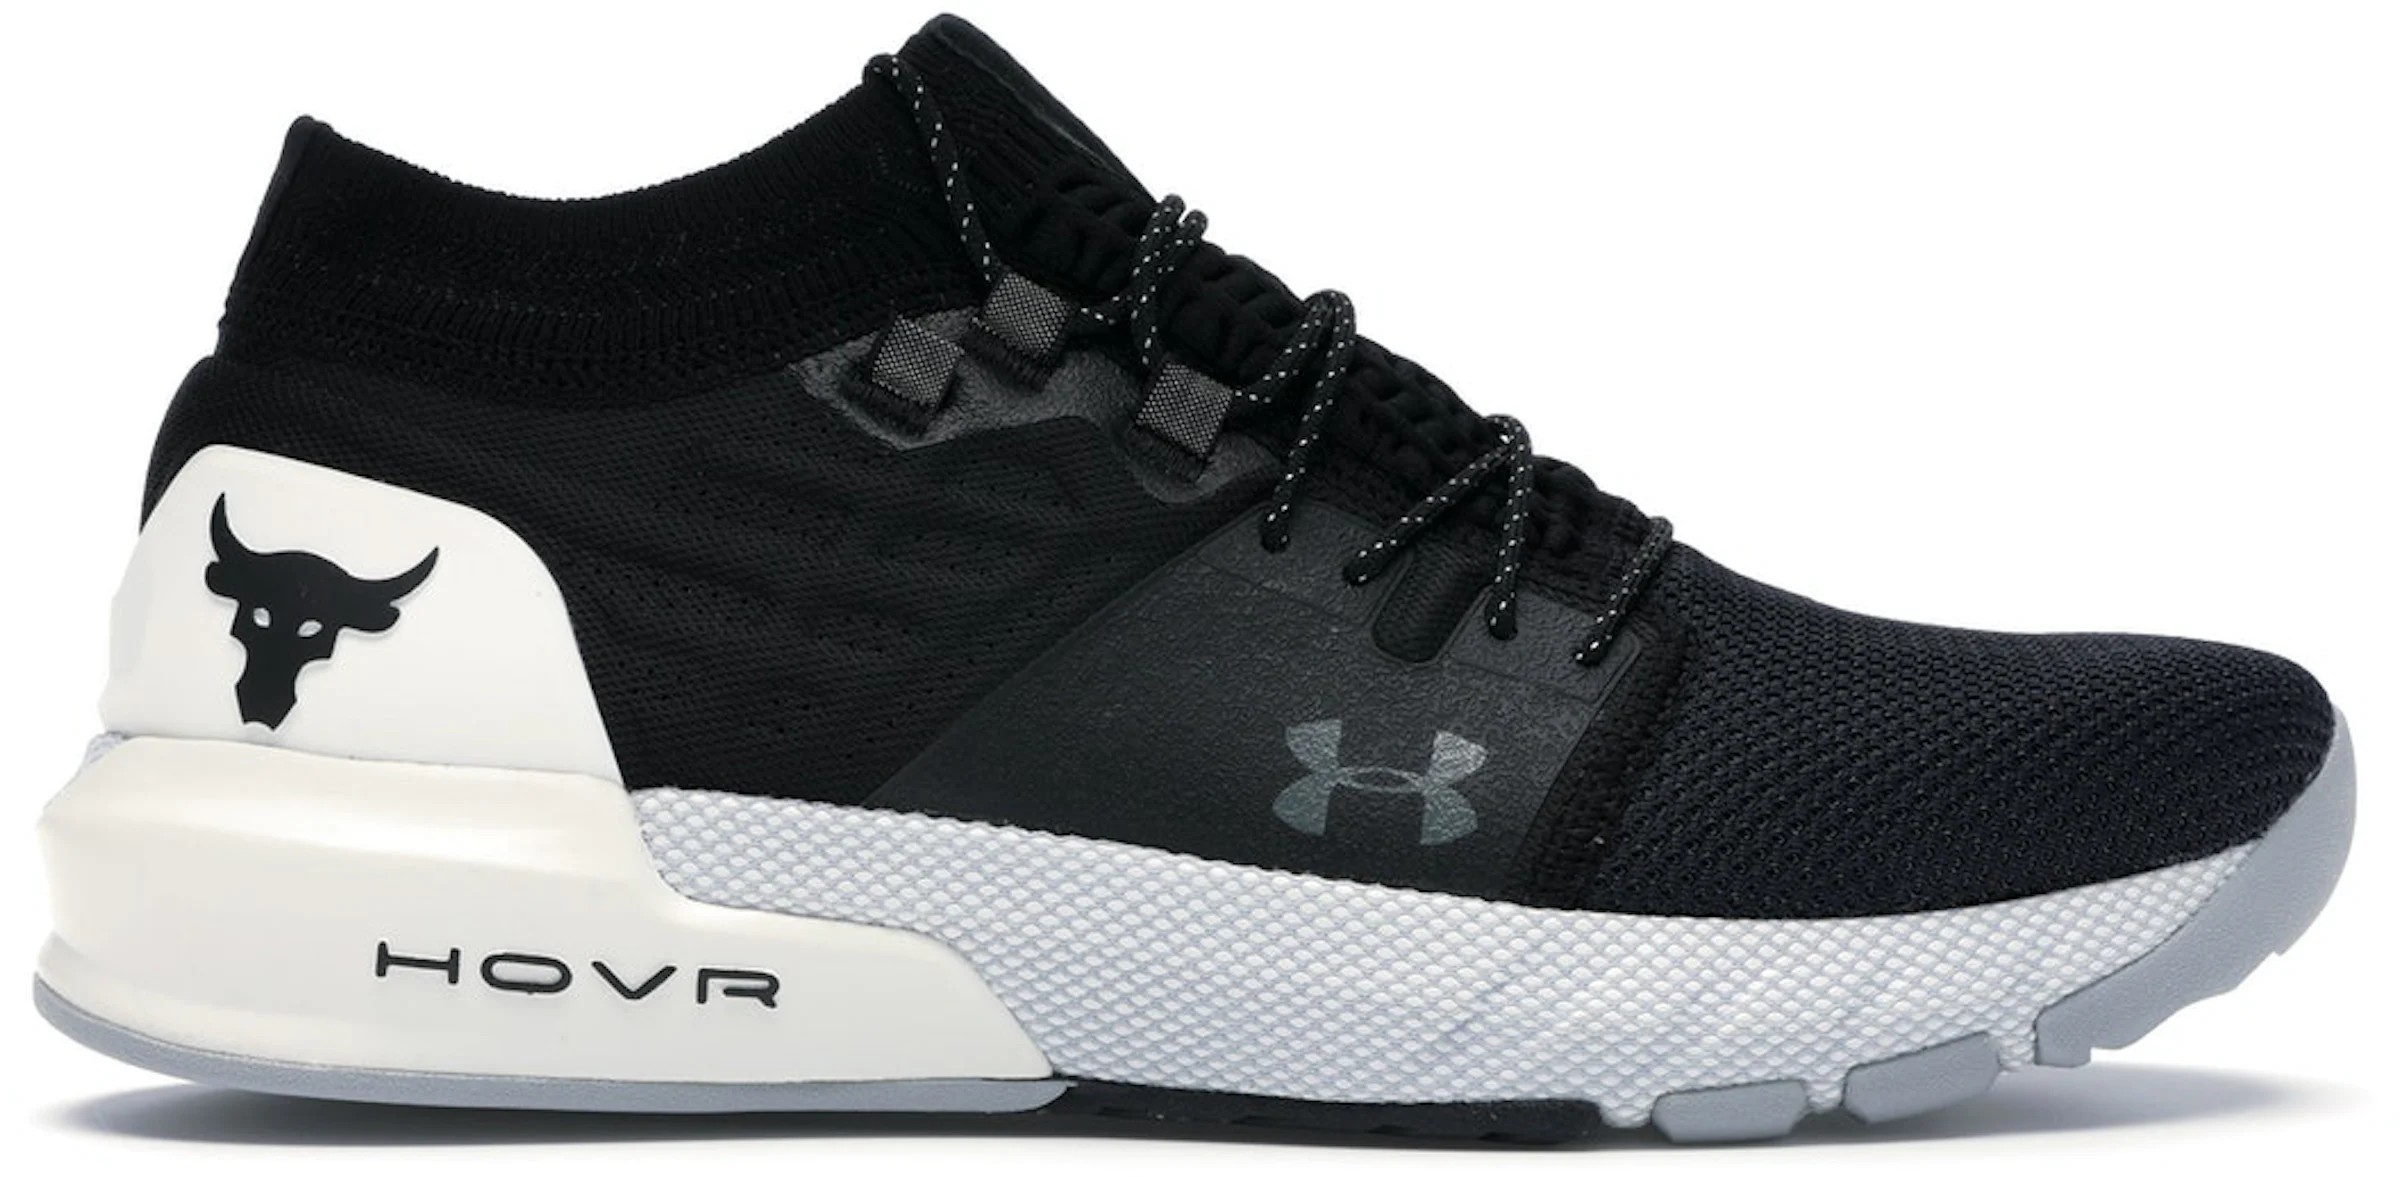 UNDER ARMOUR PROJECT ROCK 3 MENS BLACK PITCH GRAY BLACK